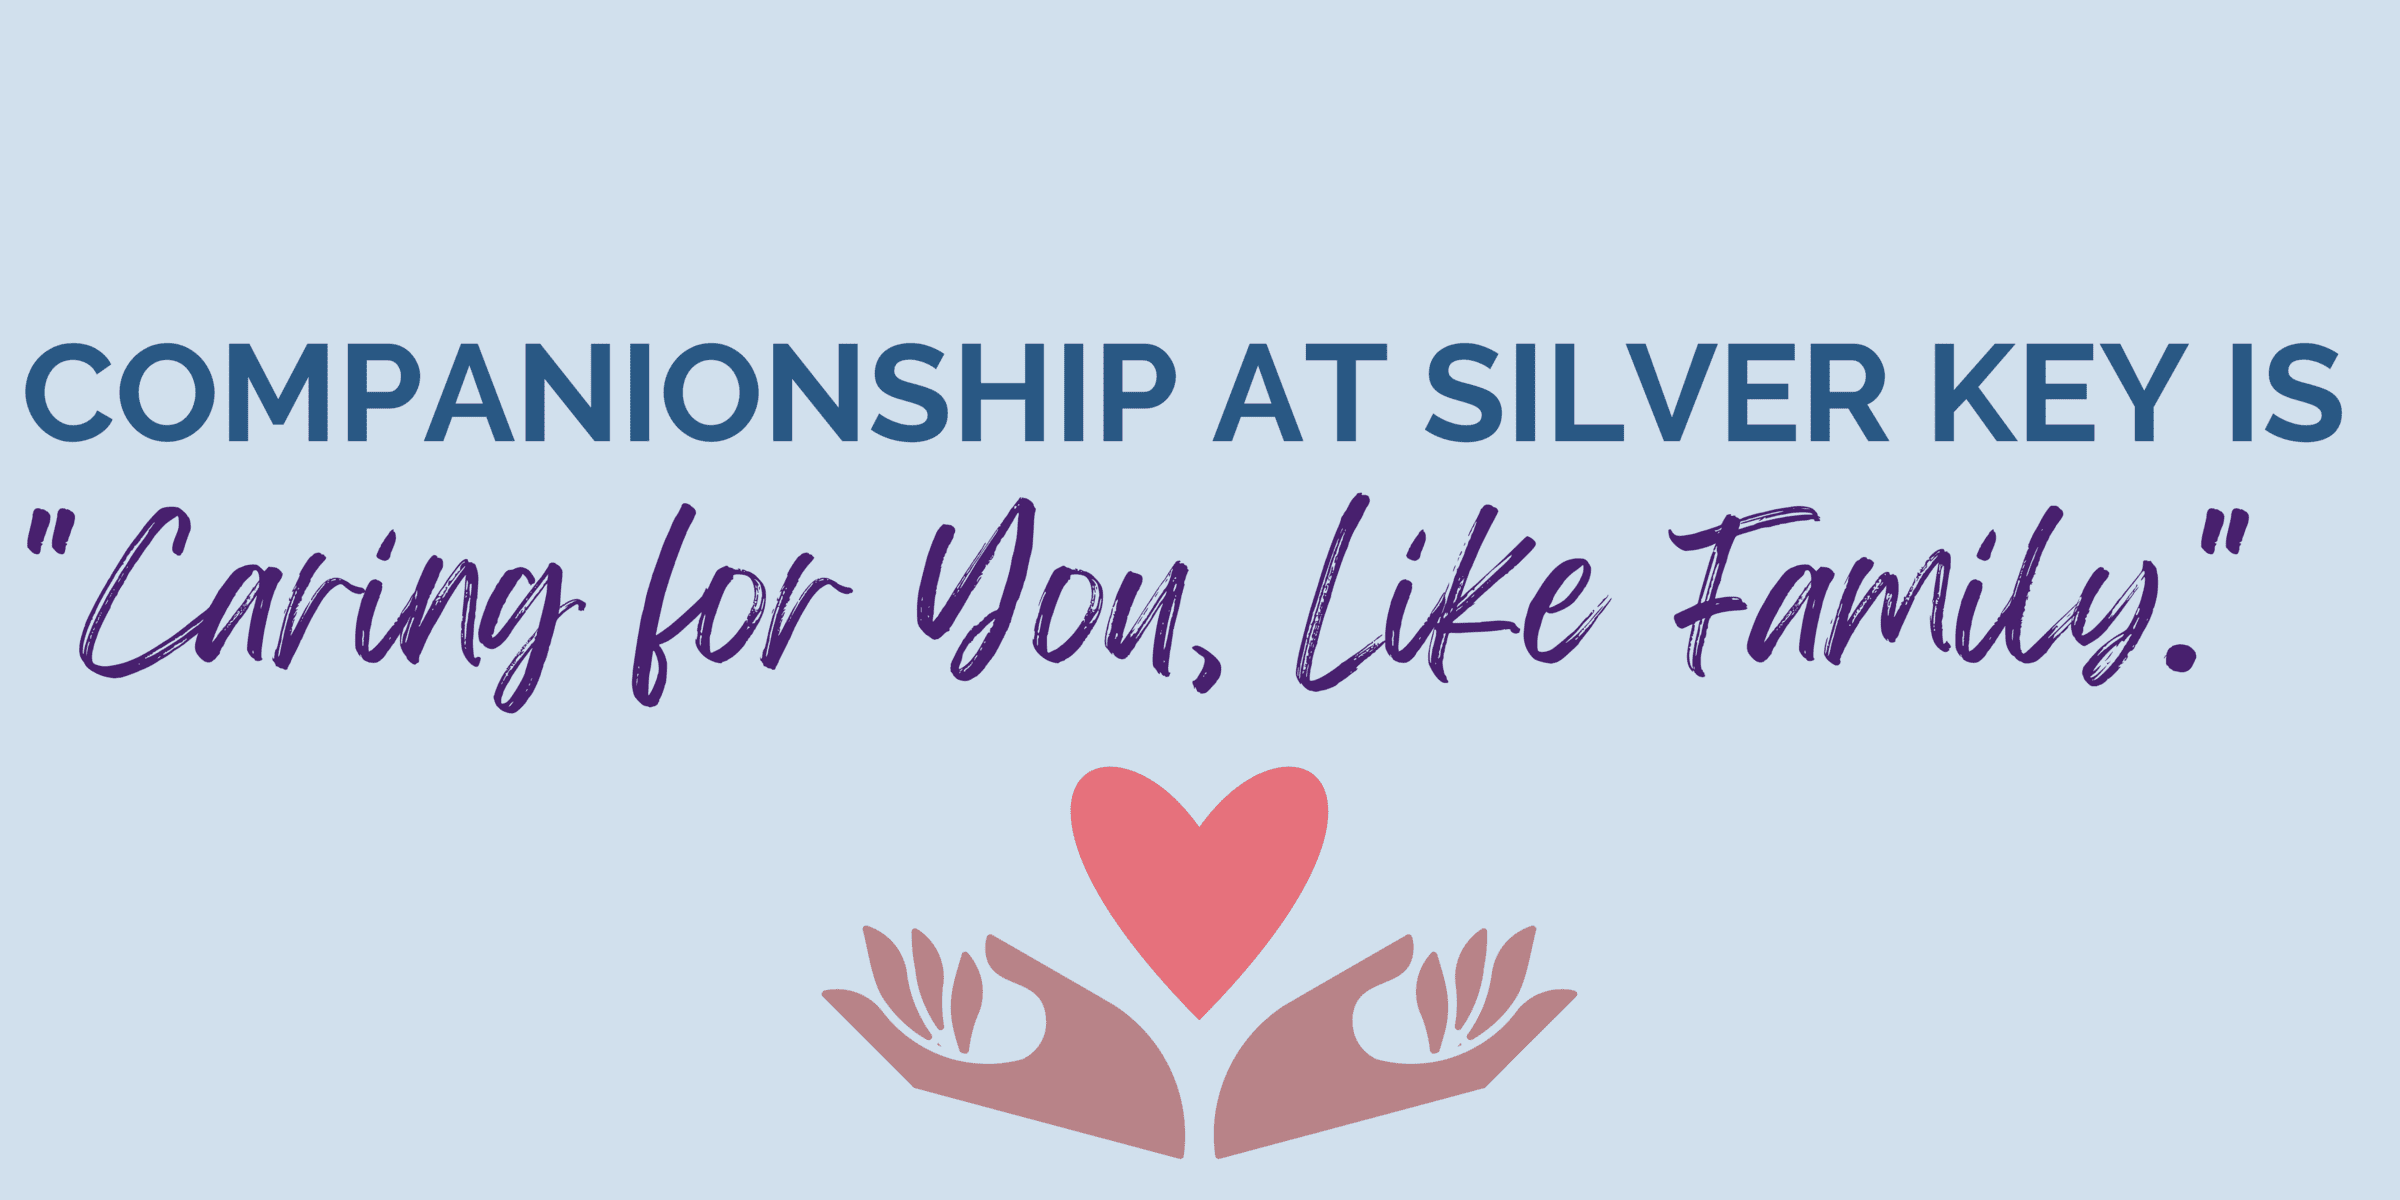 Companionship at Silver Key is Caring for you, like family.